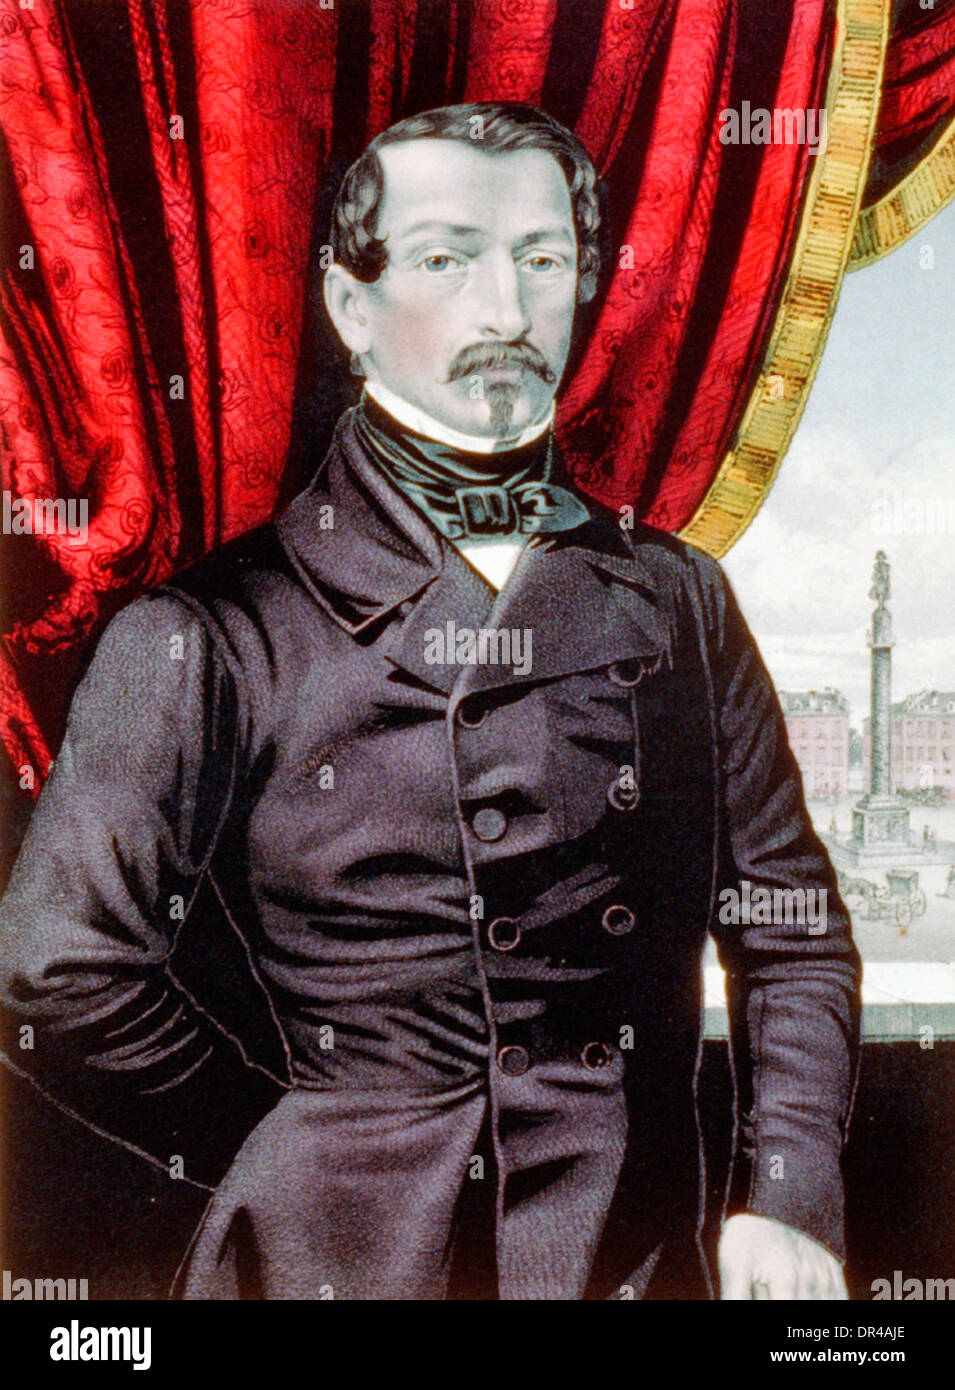 Louis-Napoléon Bonaparte (20 April 1808 – 9 January 1873) was the first President of the French Republic and, as Napoleon III, the ruler of the Second French Empire. He was the nephew and heir of Napoleon I. Stock Photo